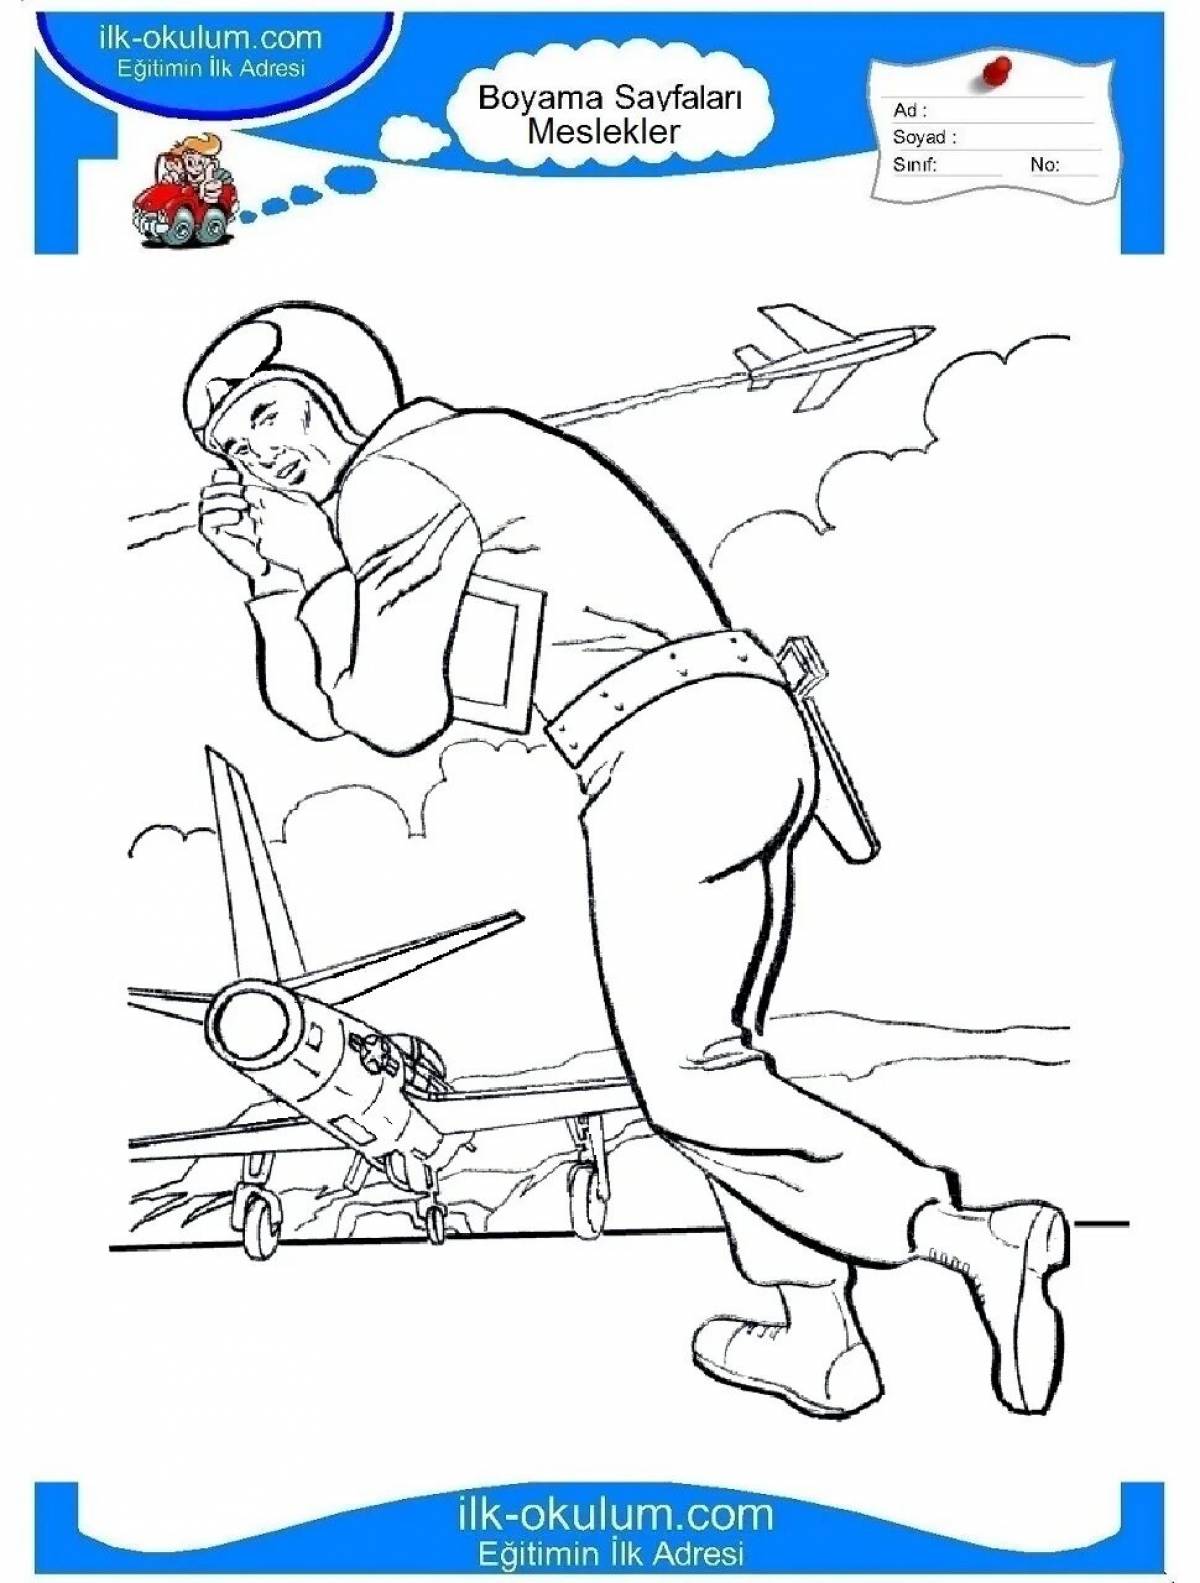 Adorable war coloring book for kids